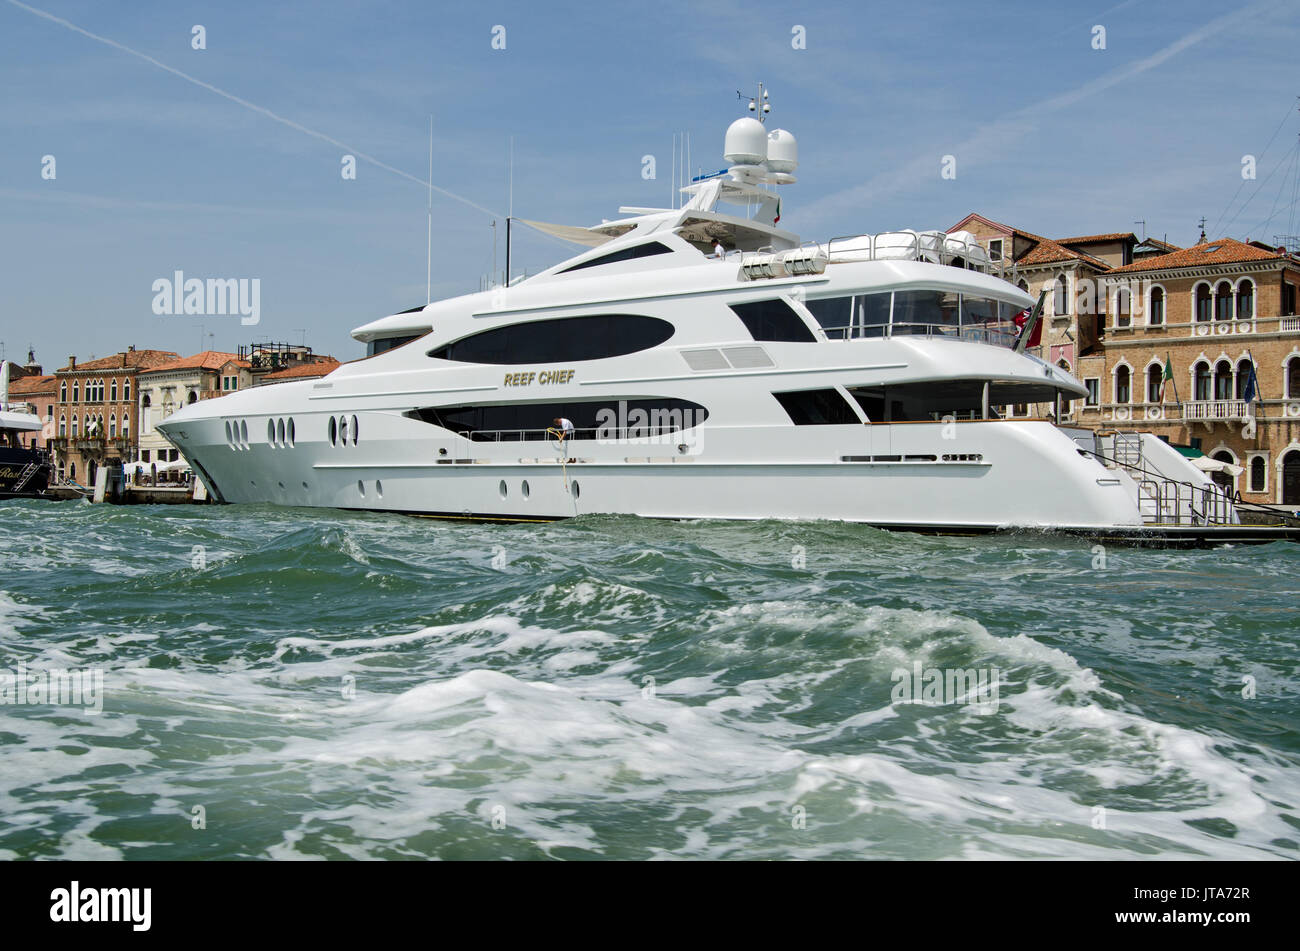 VENICE, ITALY - JUNE 10, 2017:  The luxury yacht Reef Chief moored on the Riva dia Schiavoni on a sunny Summer afternoon in Venice, Italy. Stock Photo